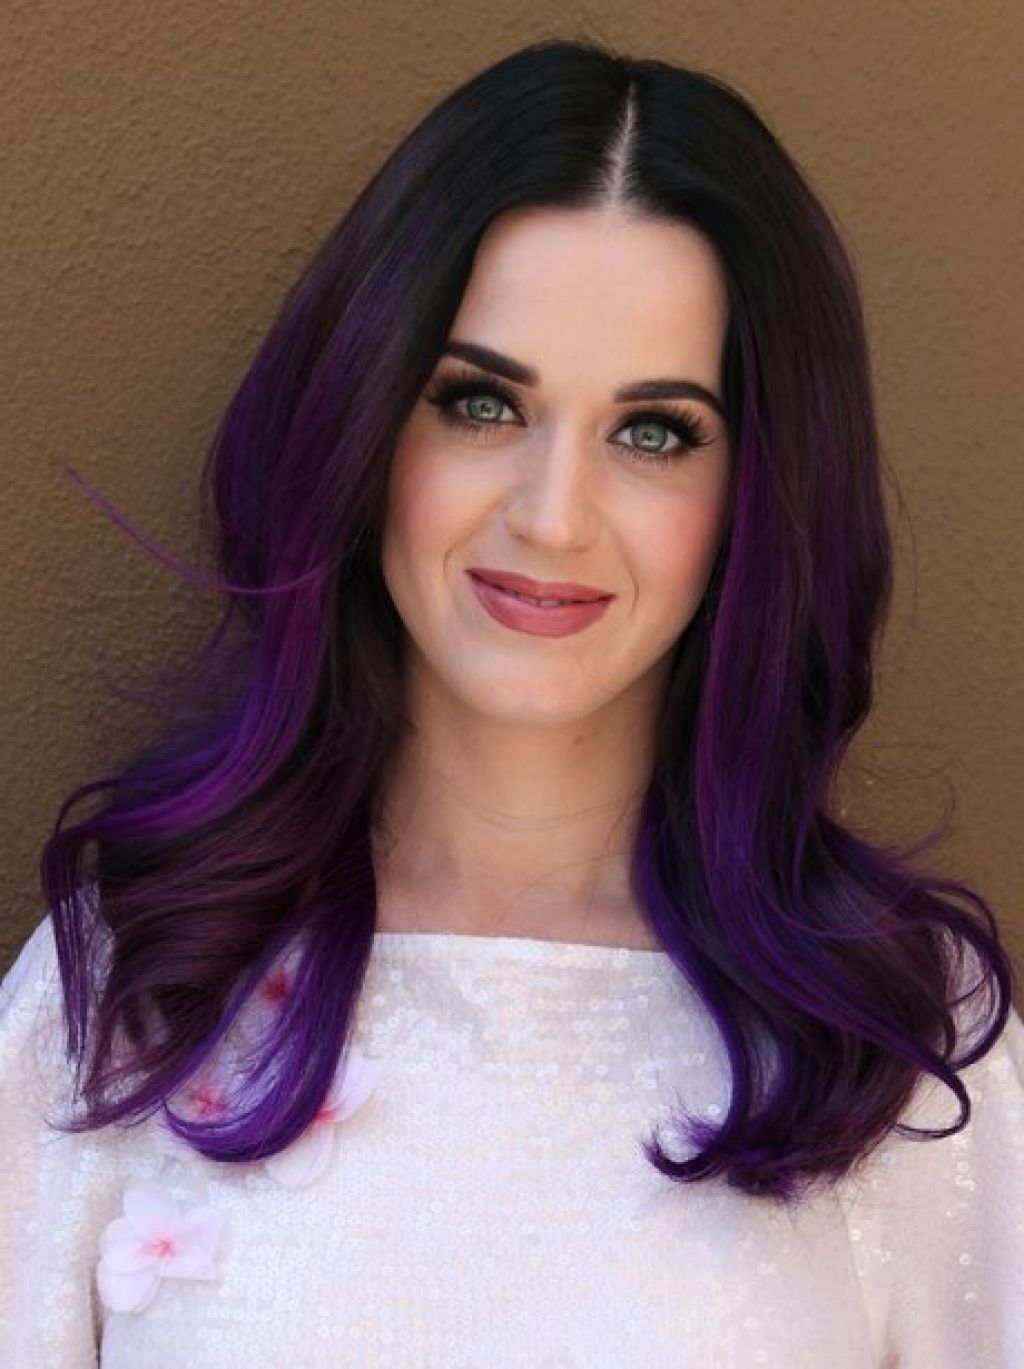 Katy Perry Hairstyle 2015